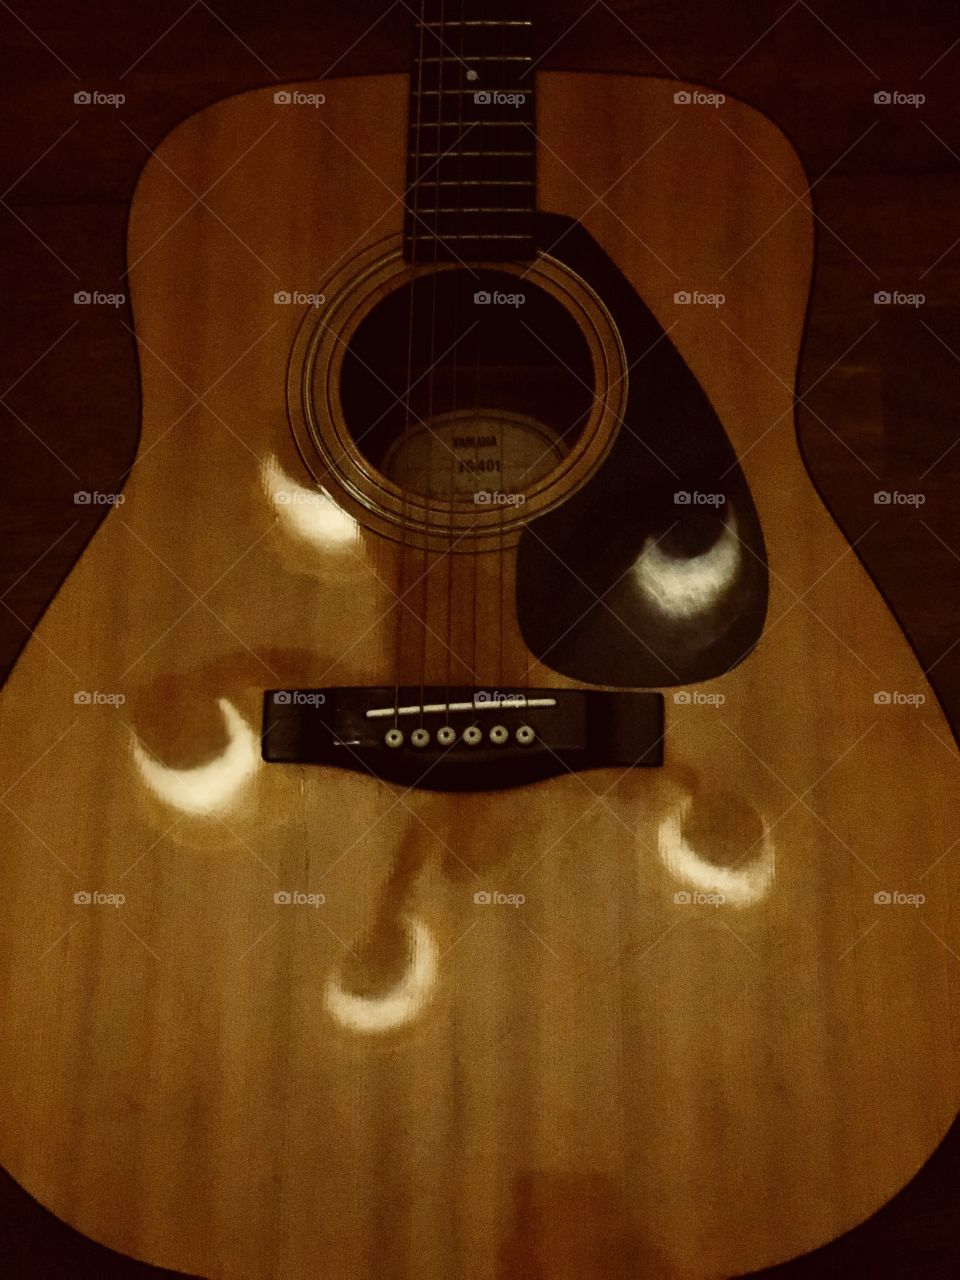 Acoustic reflections